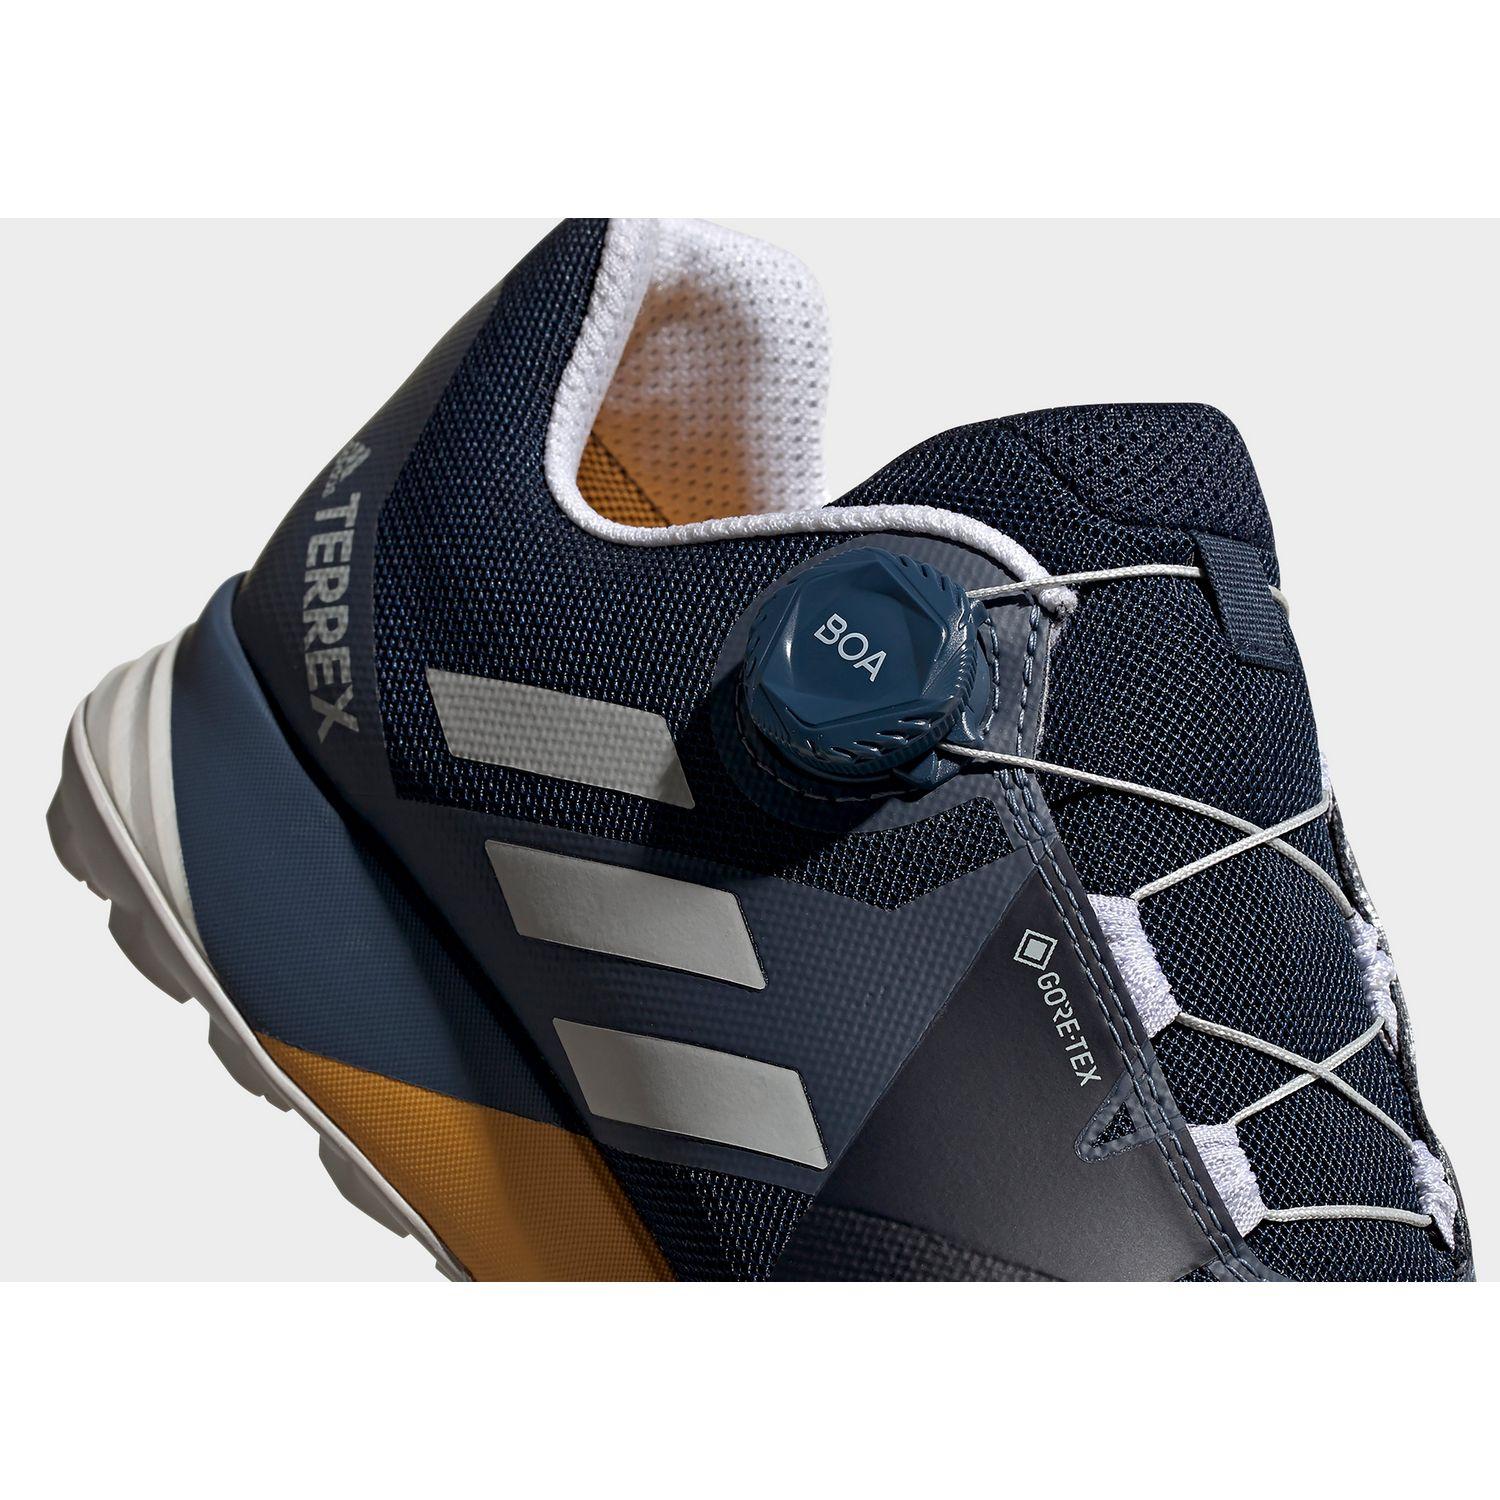 adidas Originals Rubber Terrex Two Boa Gore-tex Trail Running Shoes in ...